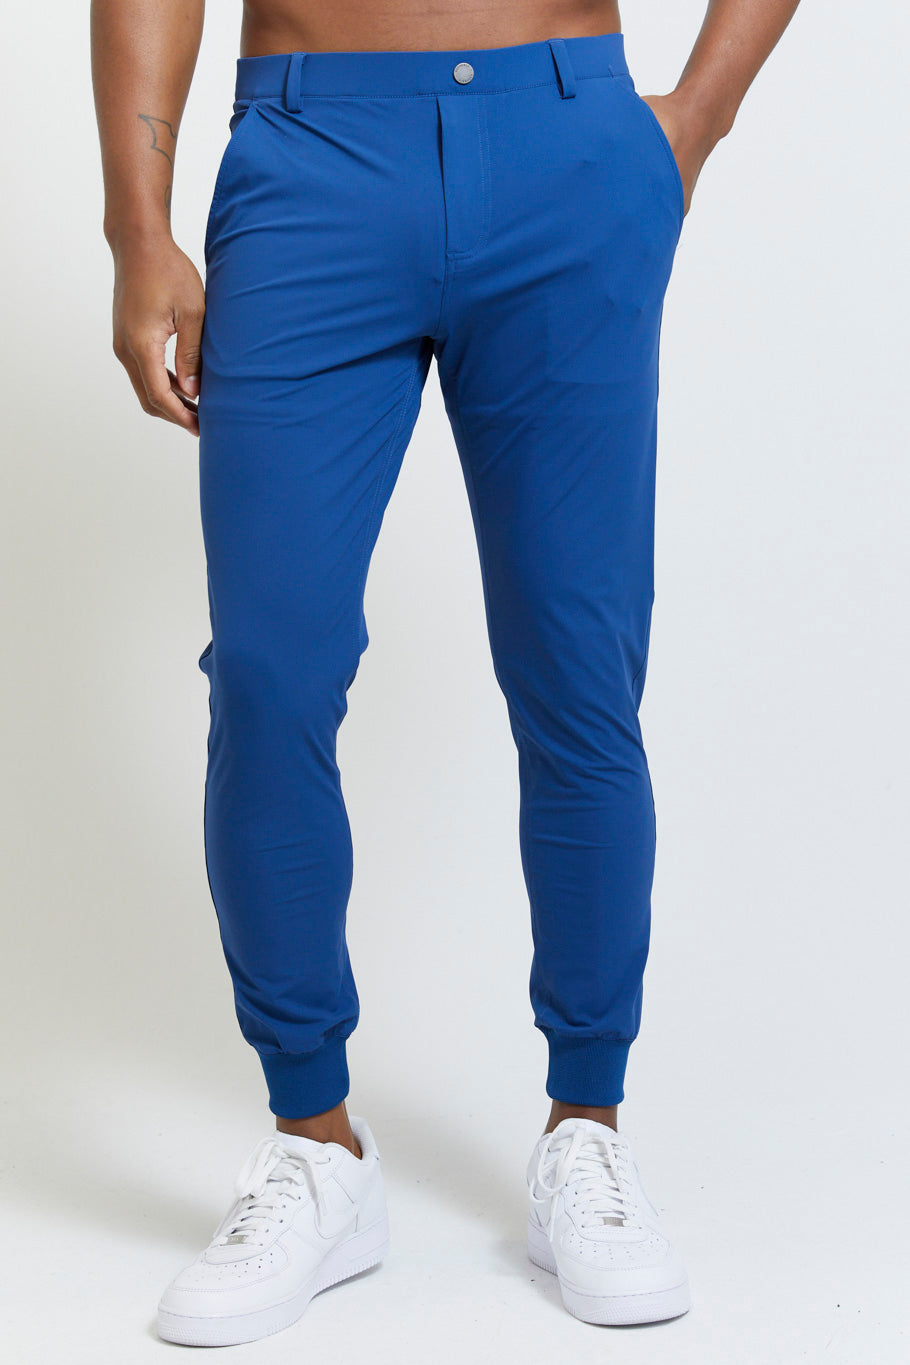 Image of the halliday pull-on jogger in admiral